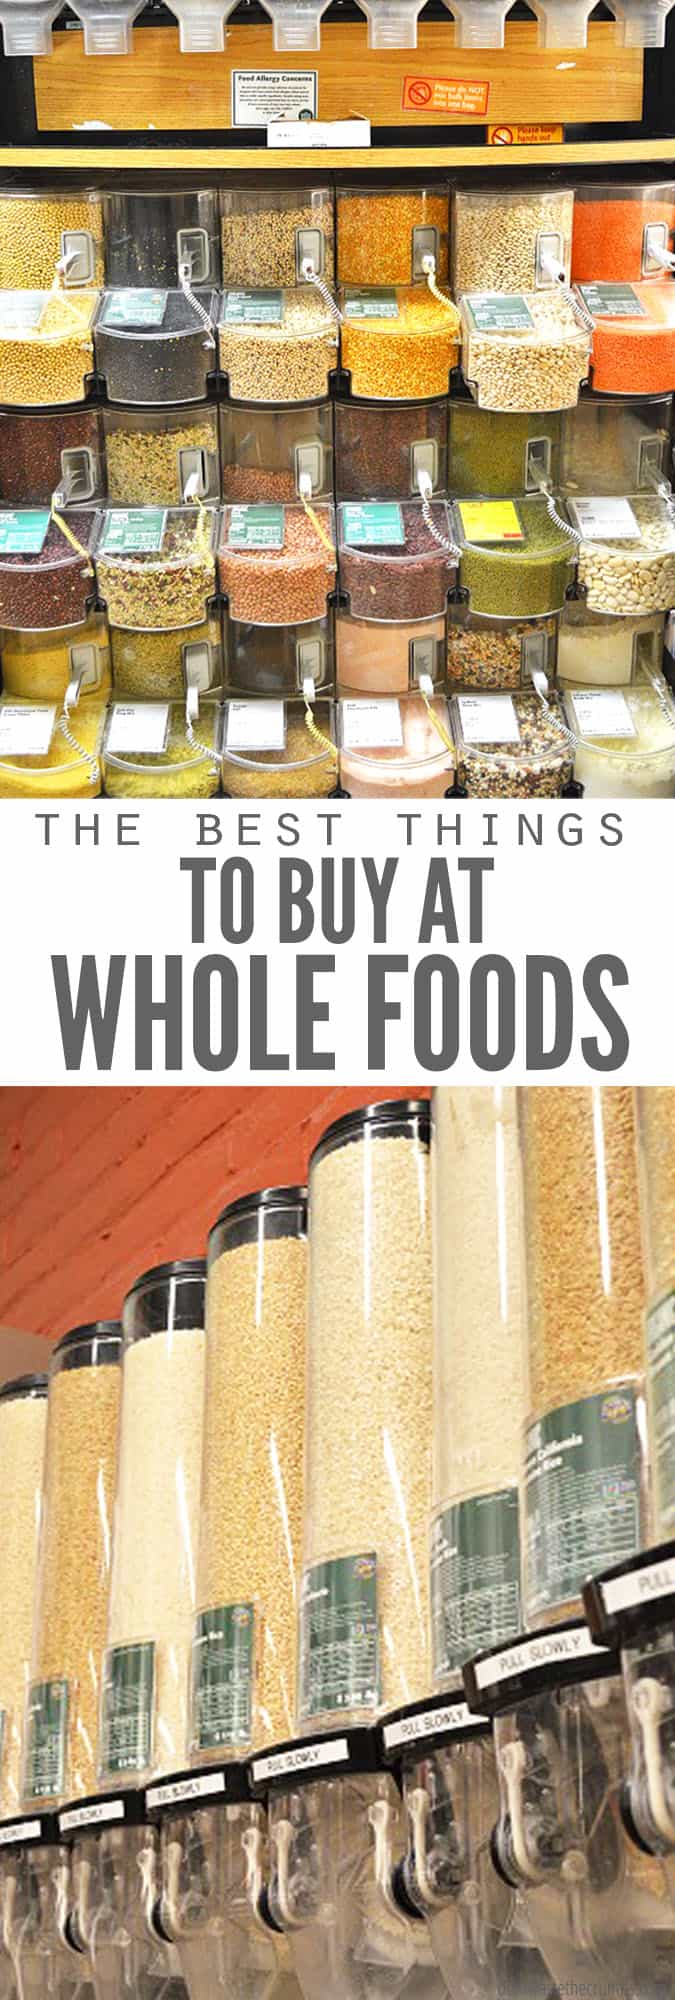 Best Things to Buy at Whole Foods for Frugal Foodies